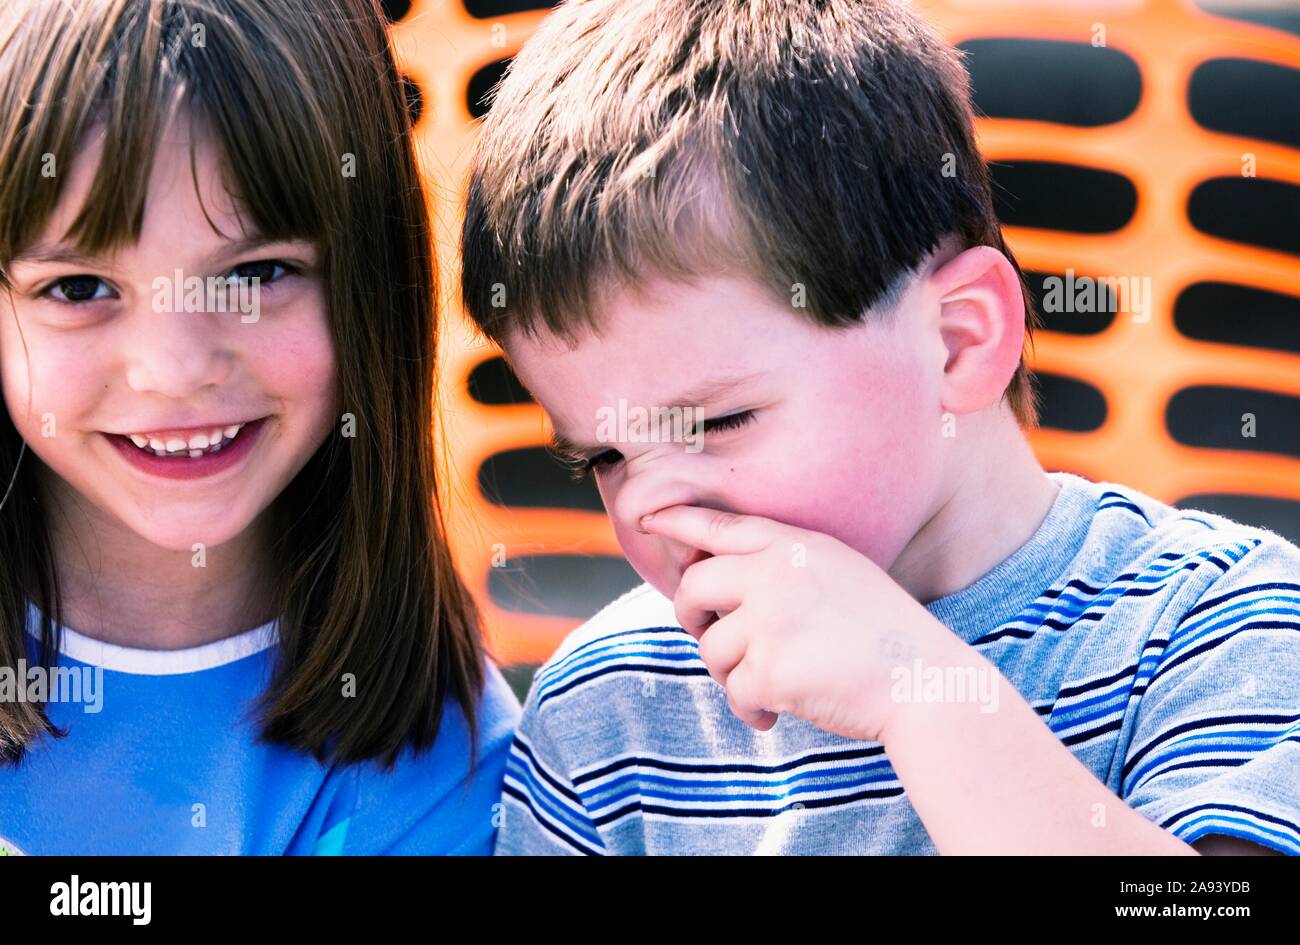 Little boy picking his nose while his sister looks on with a smile Stock Photo